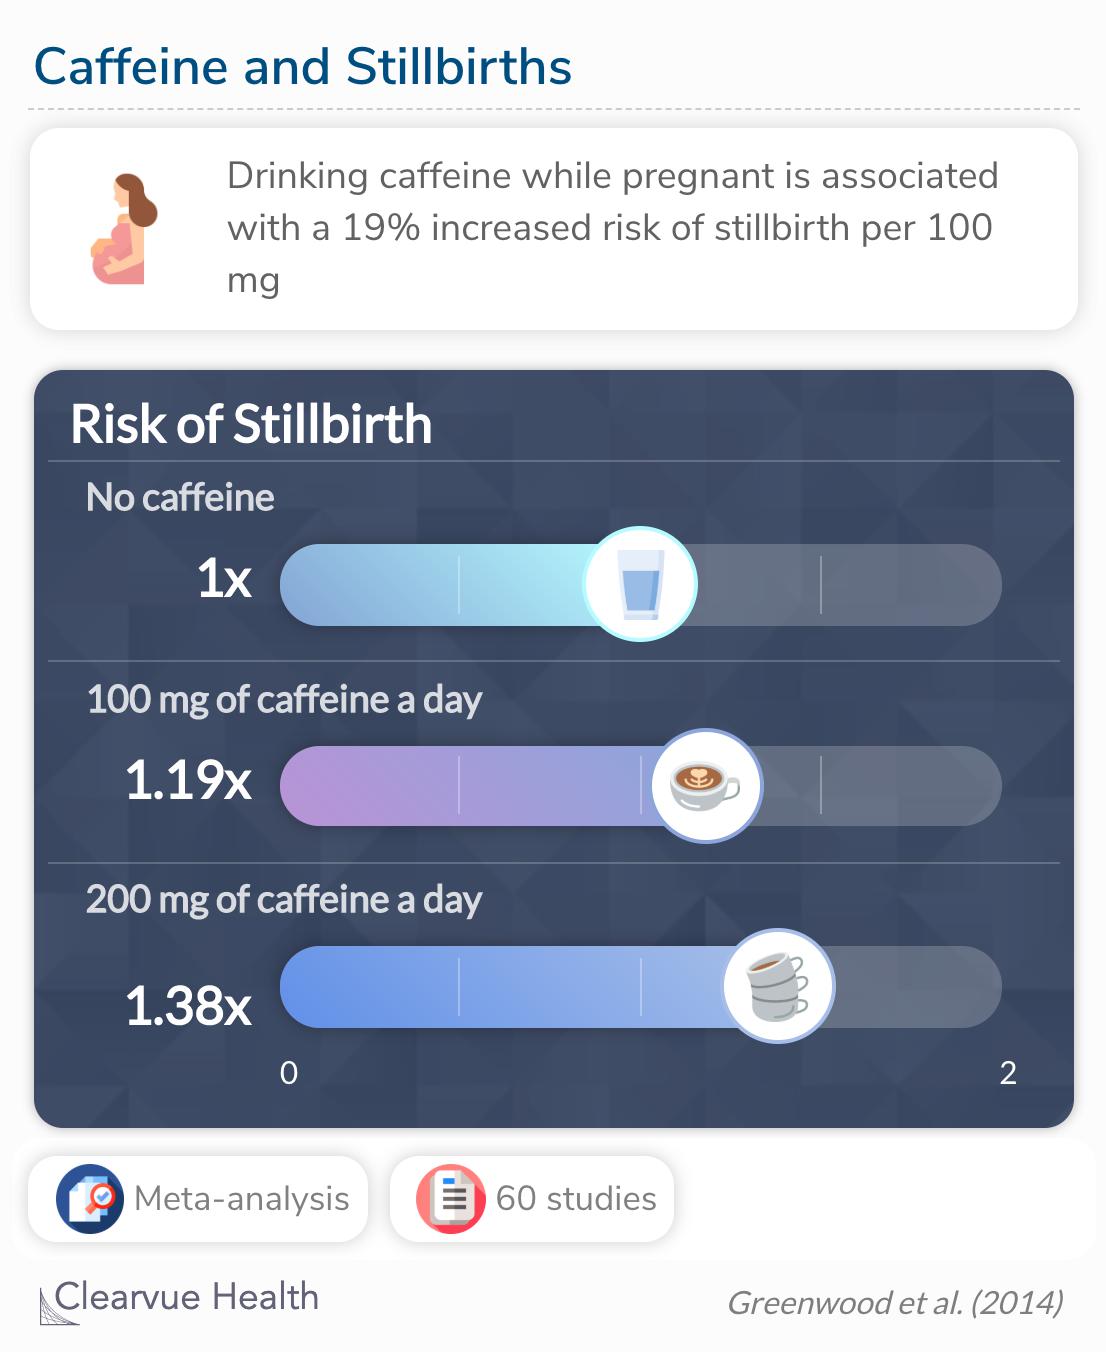 Caffeine consumption was associated with an increased risk of stillbirth.